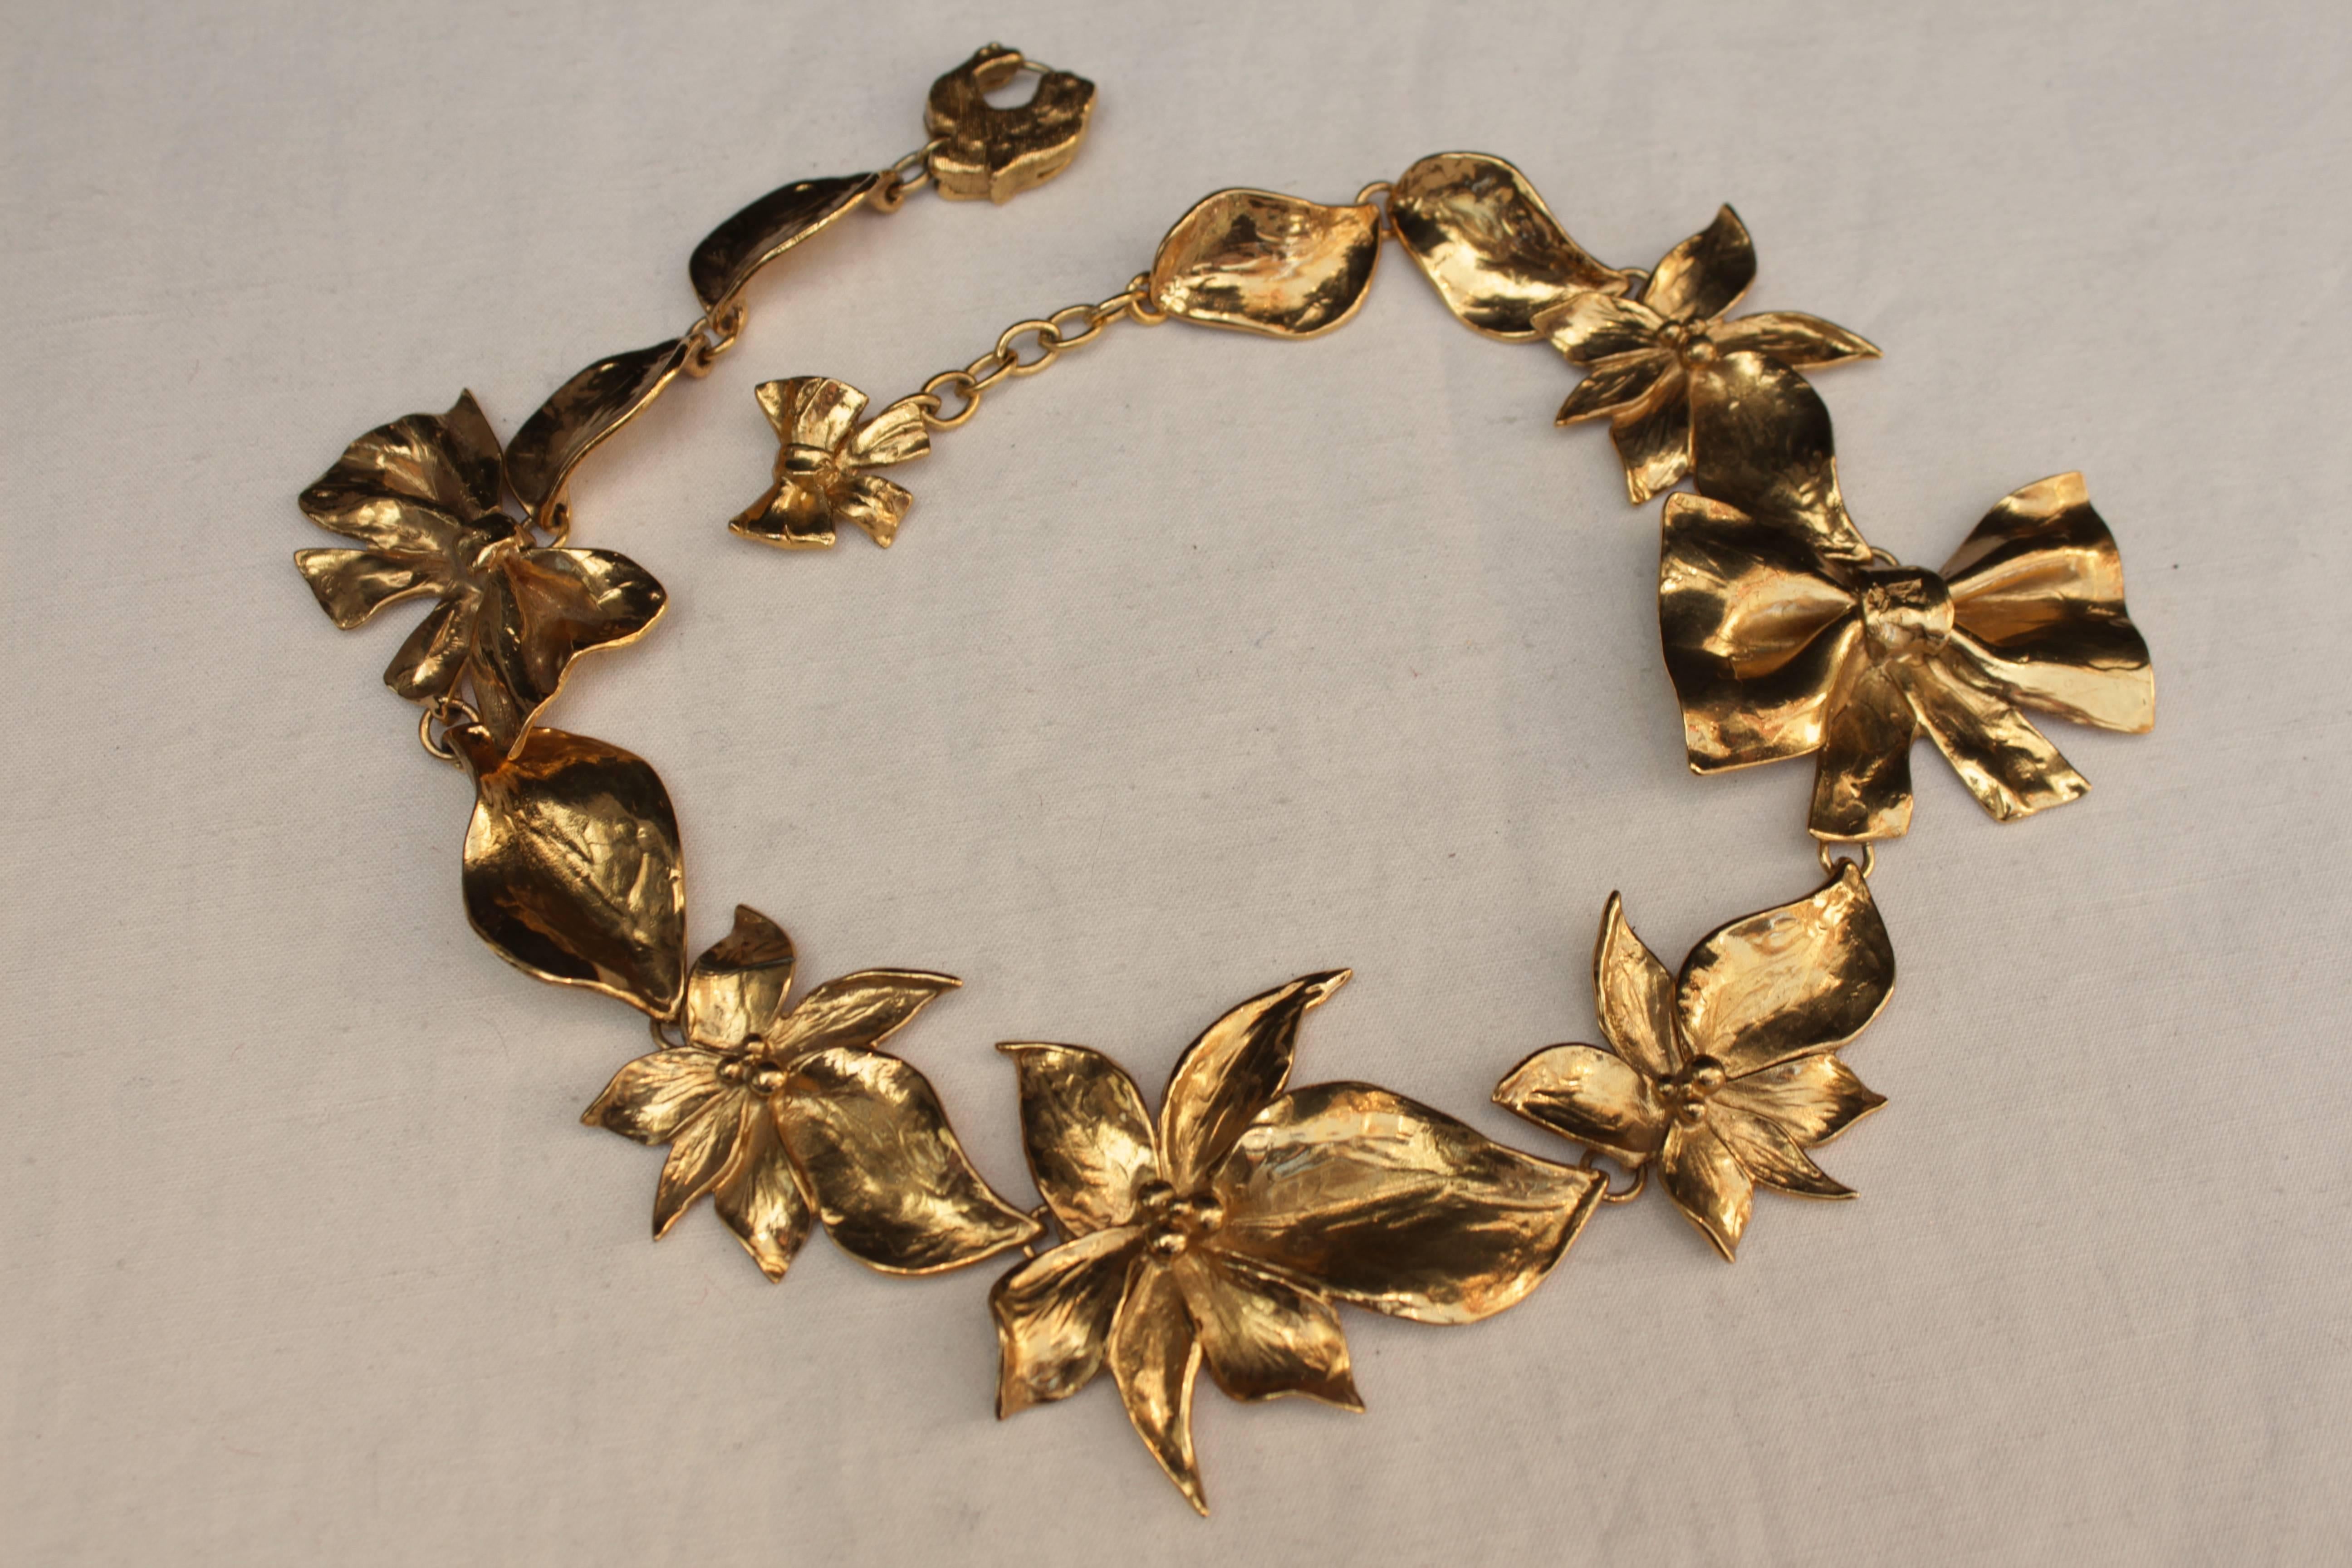 JEAN-LOUIS CHERRER (Made in France) Short necklace made of hammered gilt metal elements figuring flowers and ribbons. The clasp is in shape of a feline head, with trademark Scherrer.

Piece dating from the 1980s.

Very good